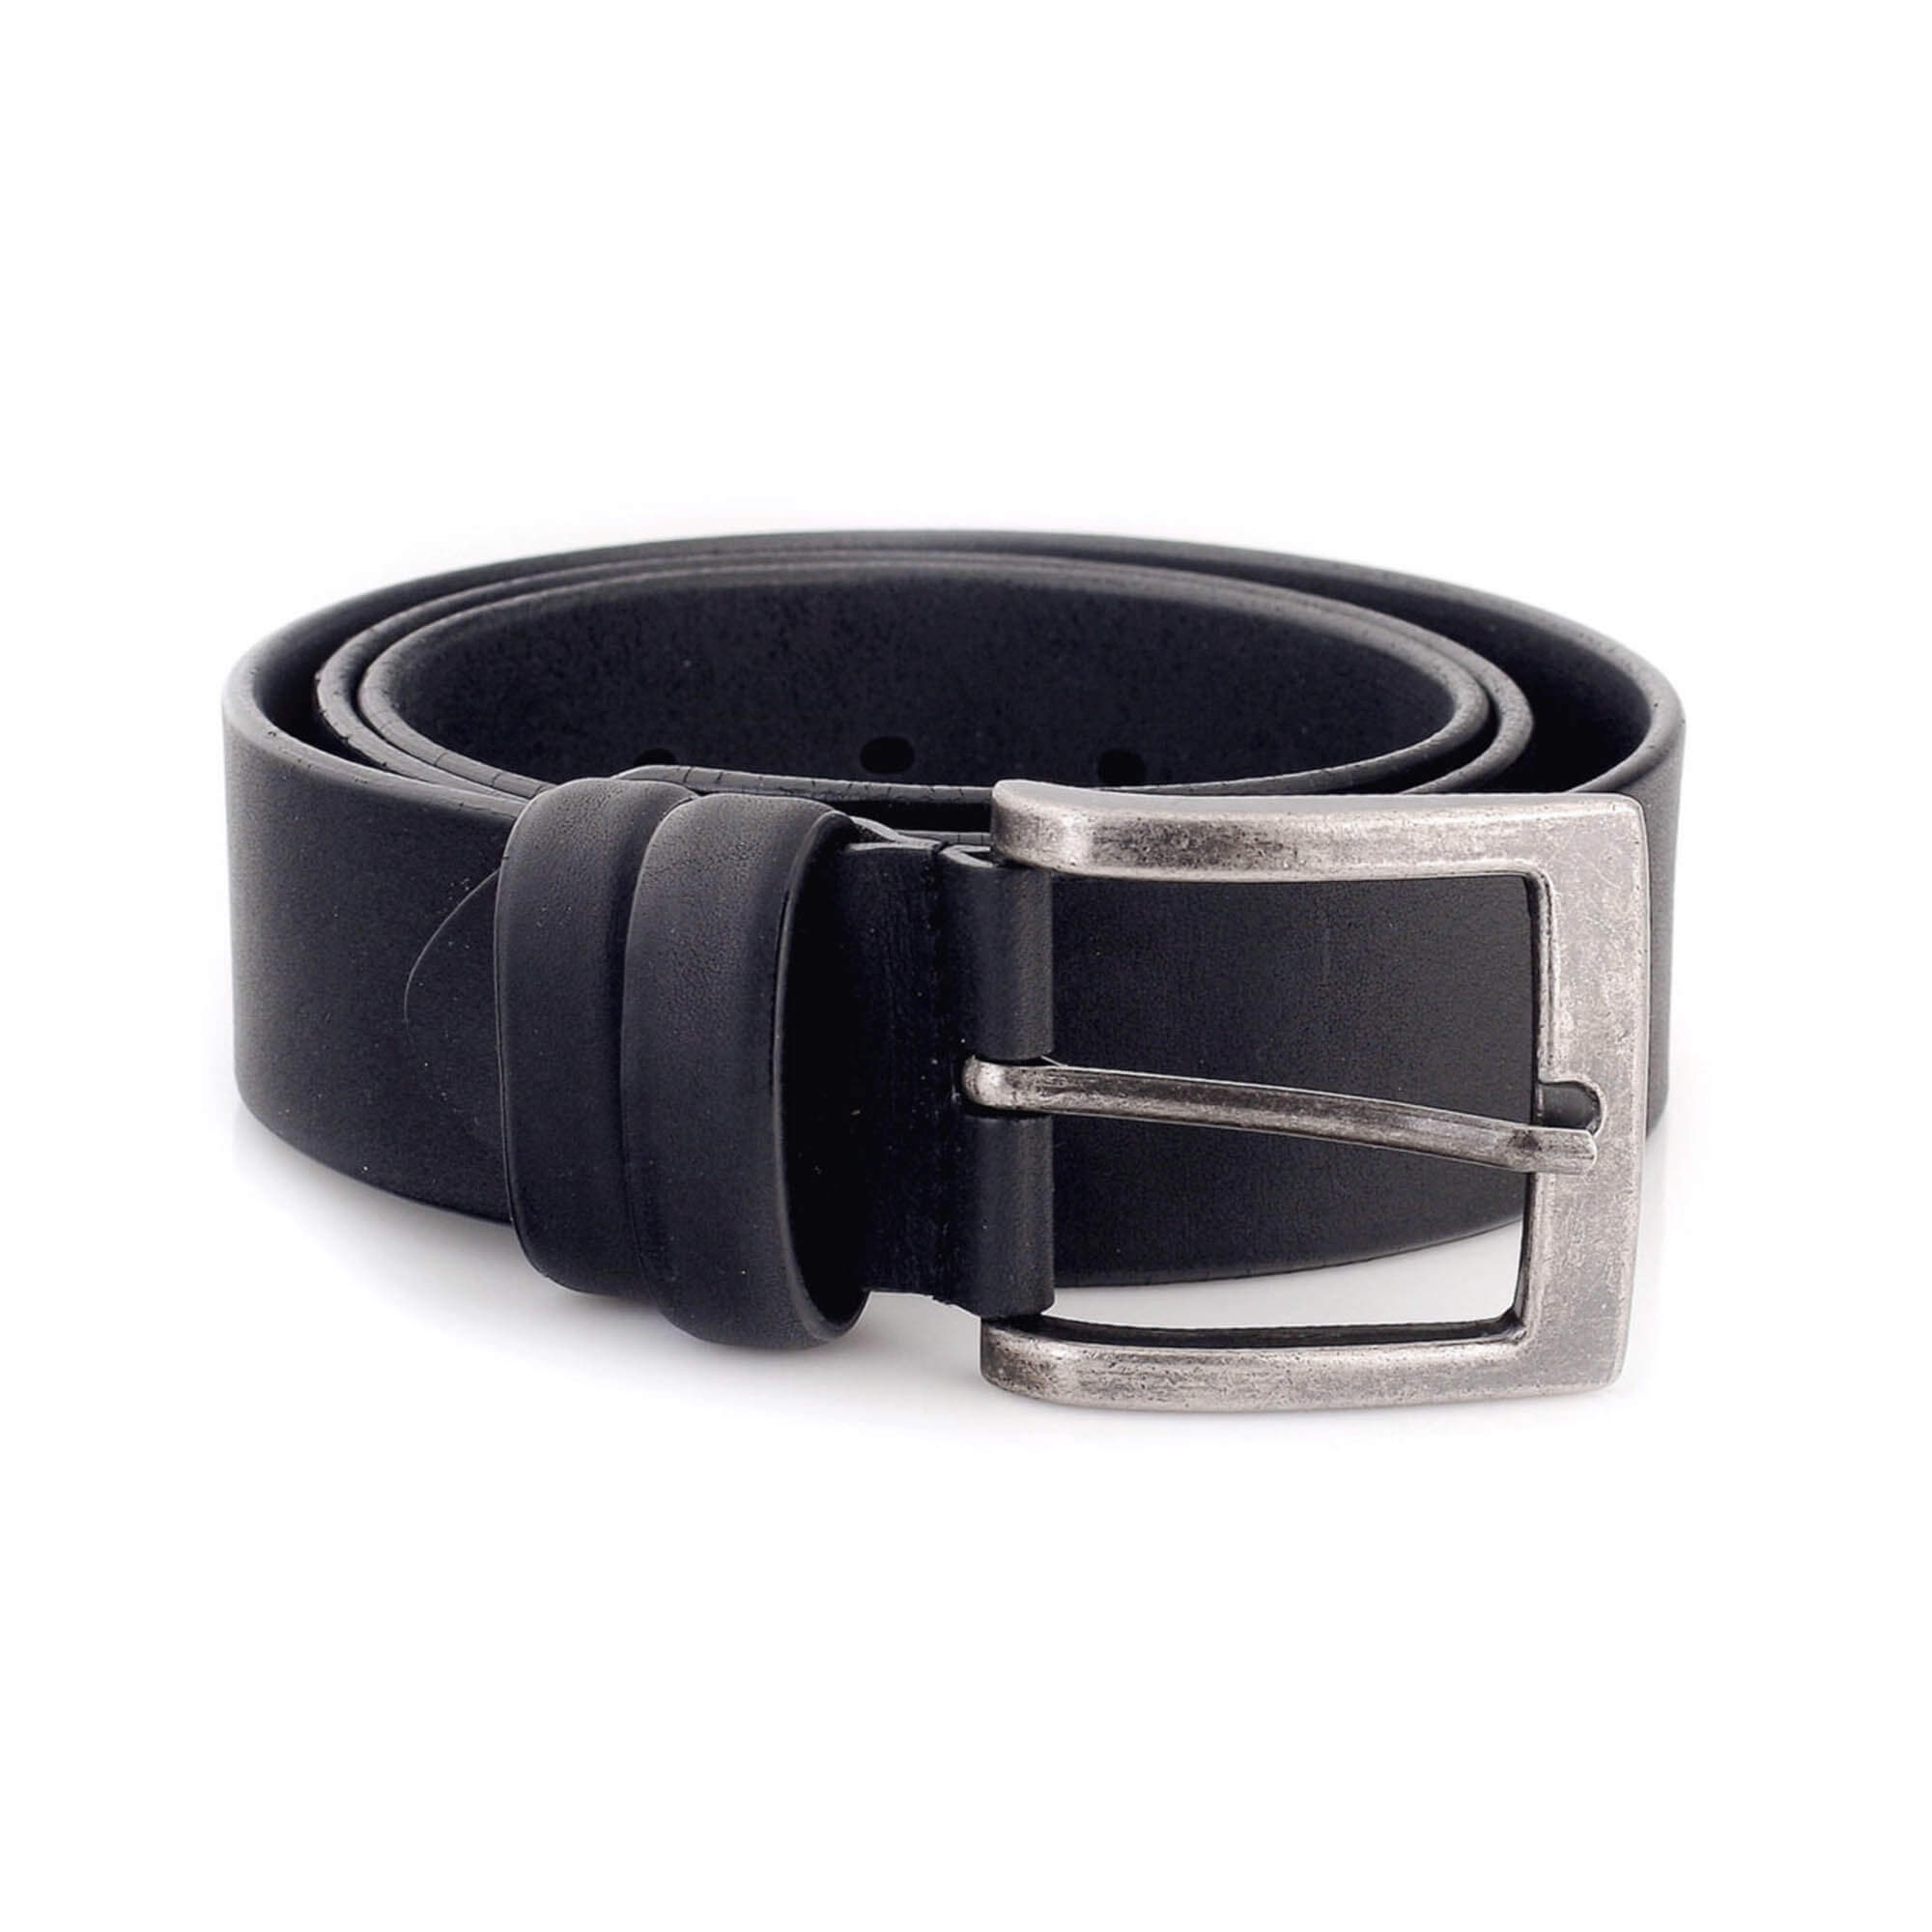 Buy Mens Belt For Black Jeans - Thick Wide Leather 1 1/2 Inch